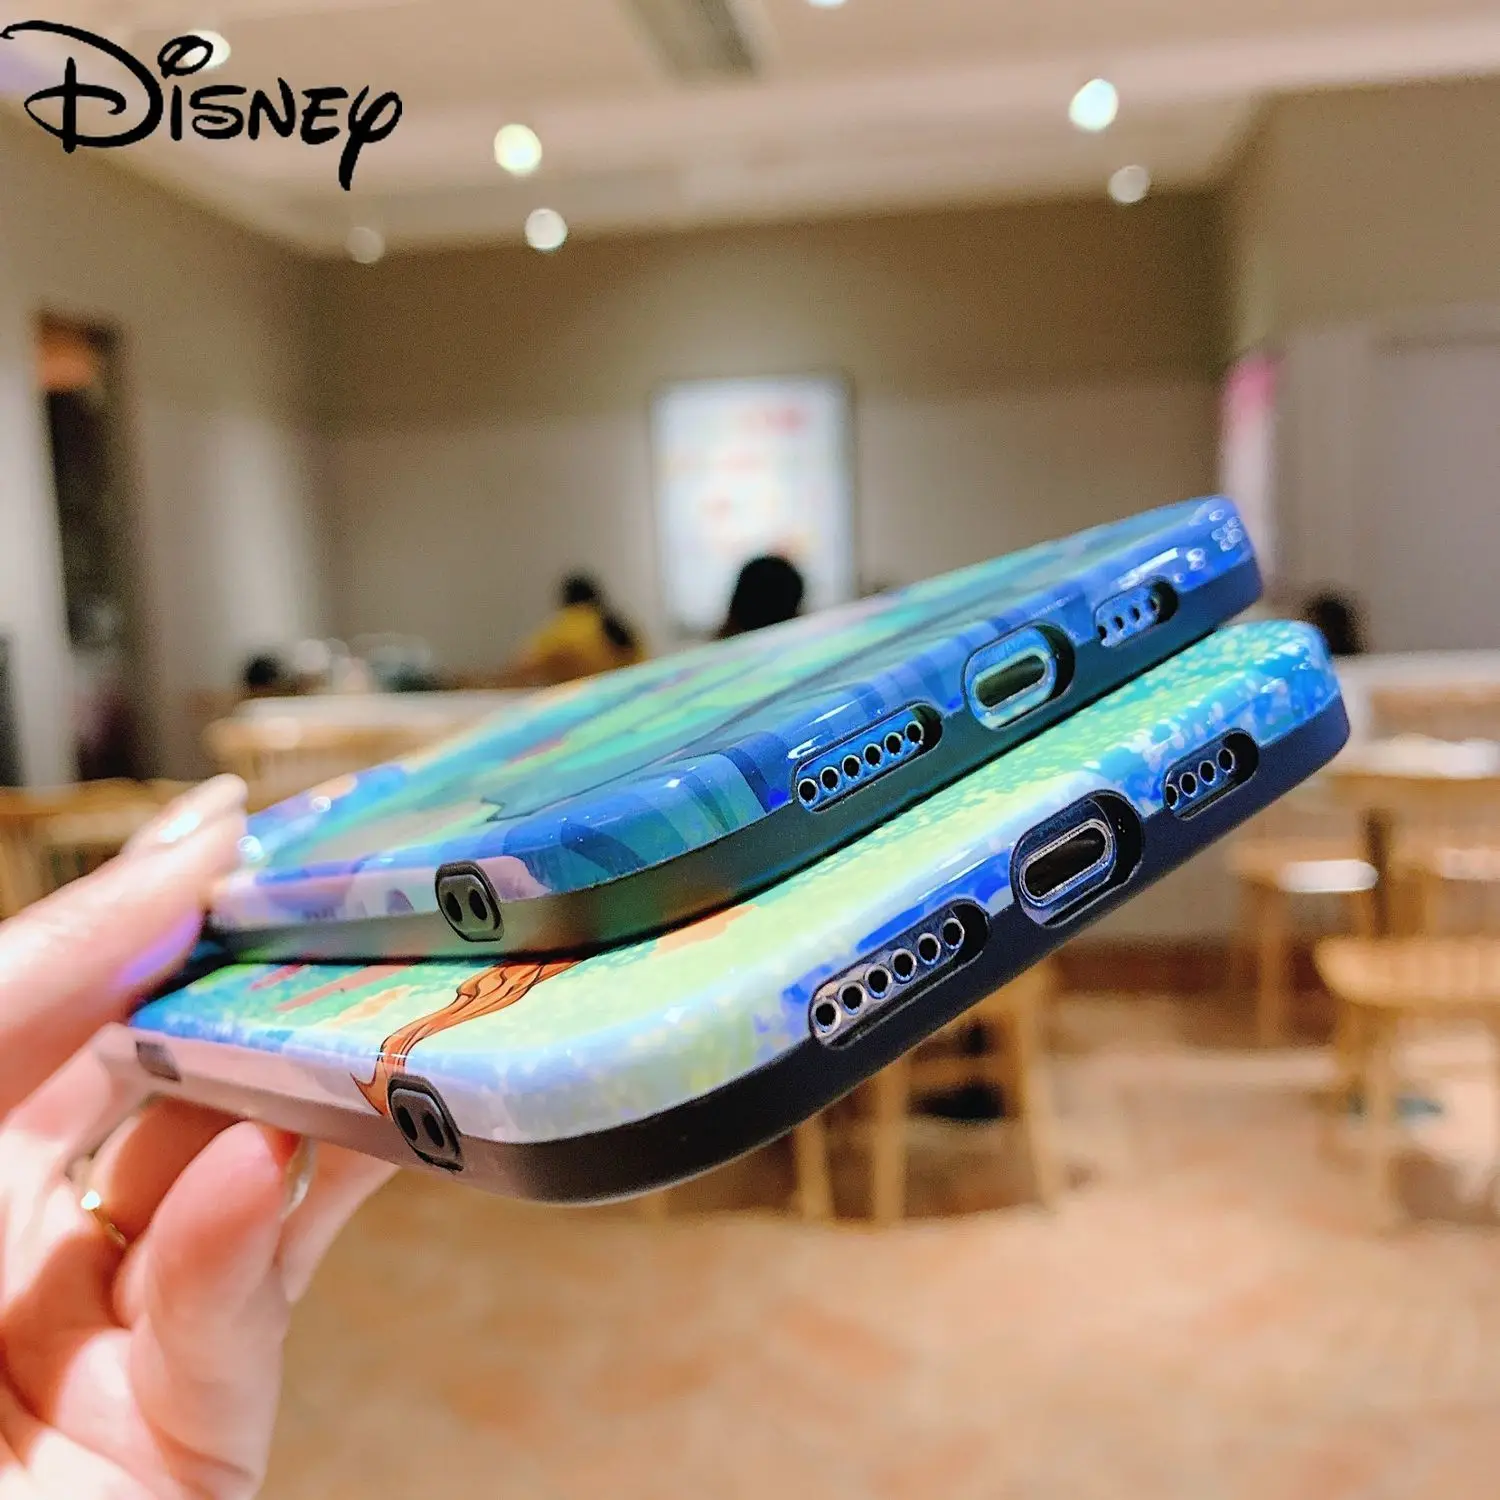 

Disney cartoon cute Stitch Blu-ray mobile phone case with stand for iPhone12mini /12promax/xr/7/8plus/11promax/11/11pro/xsmax